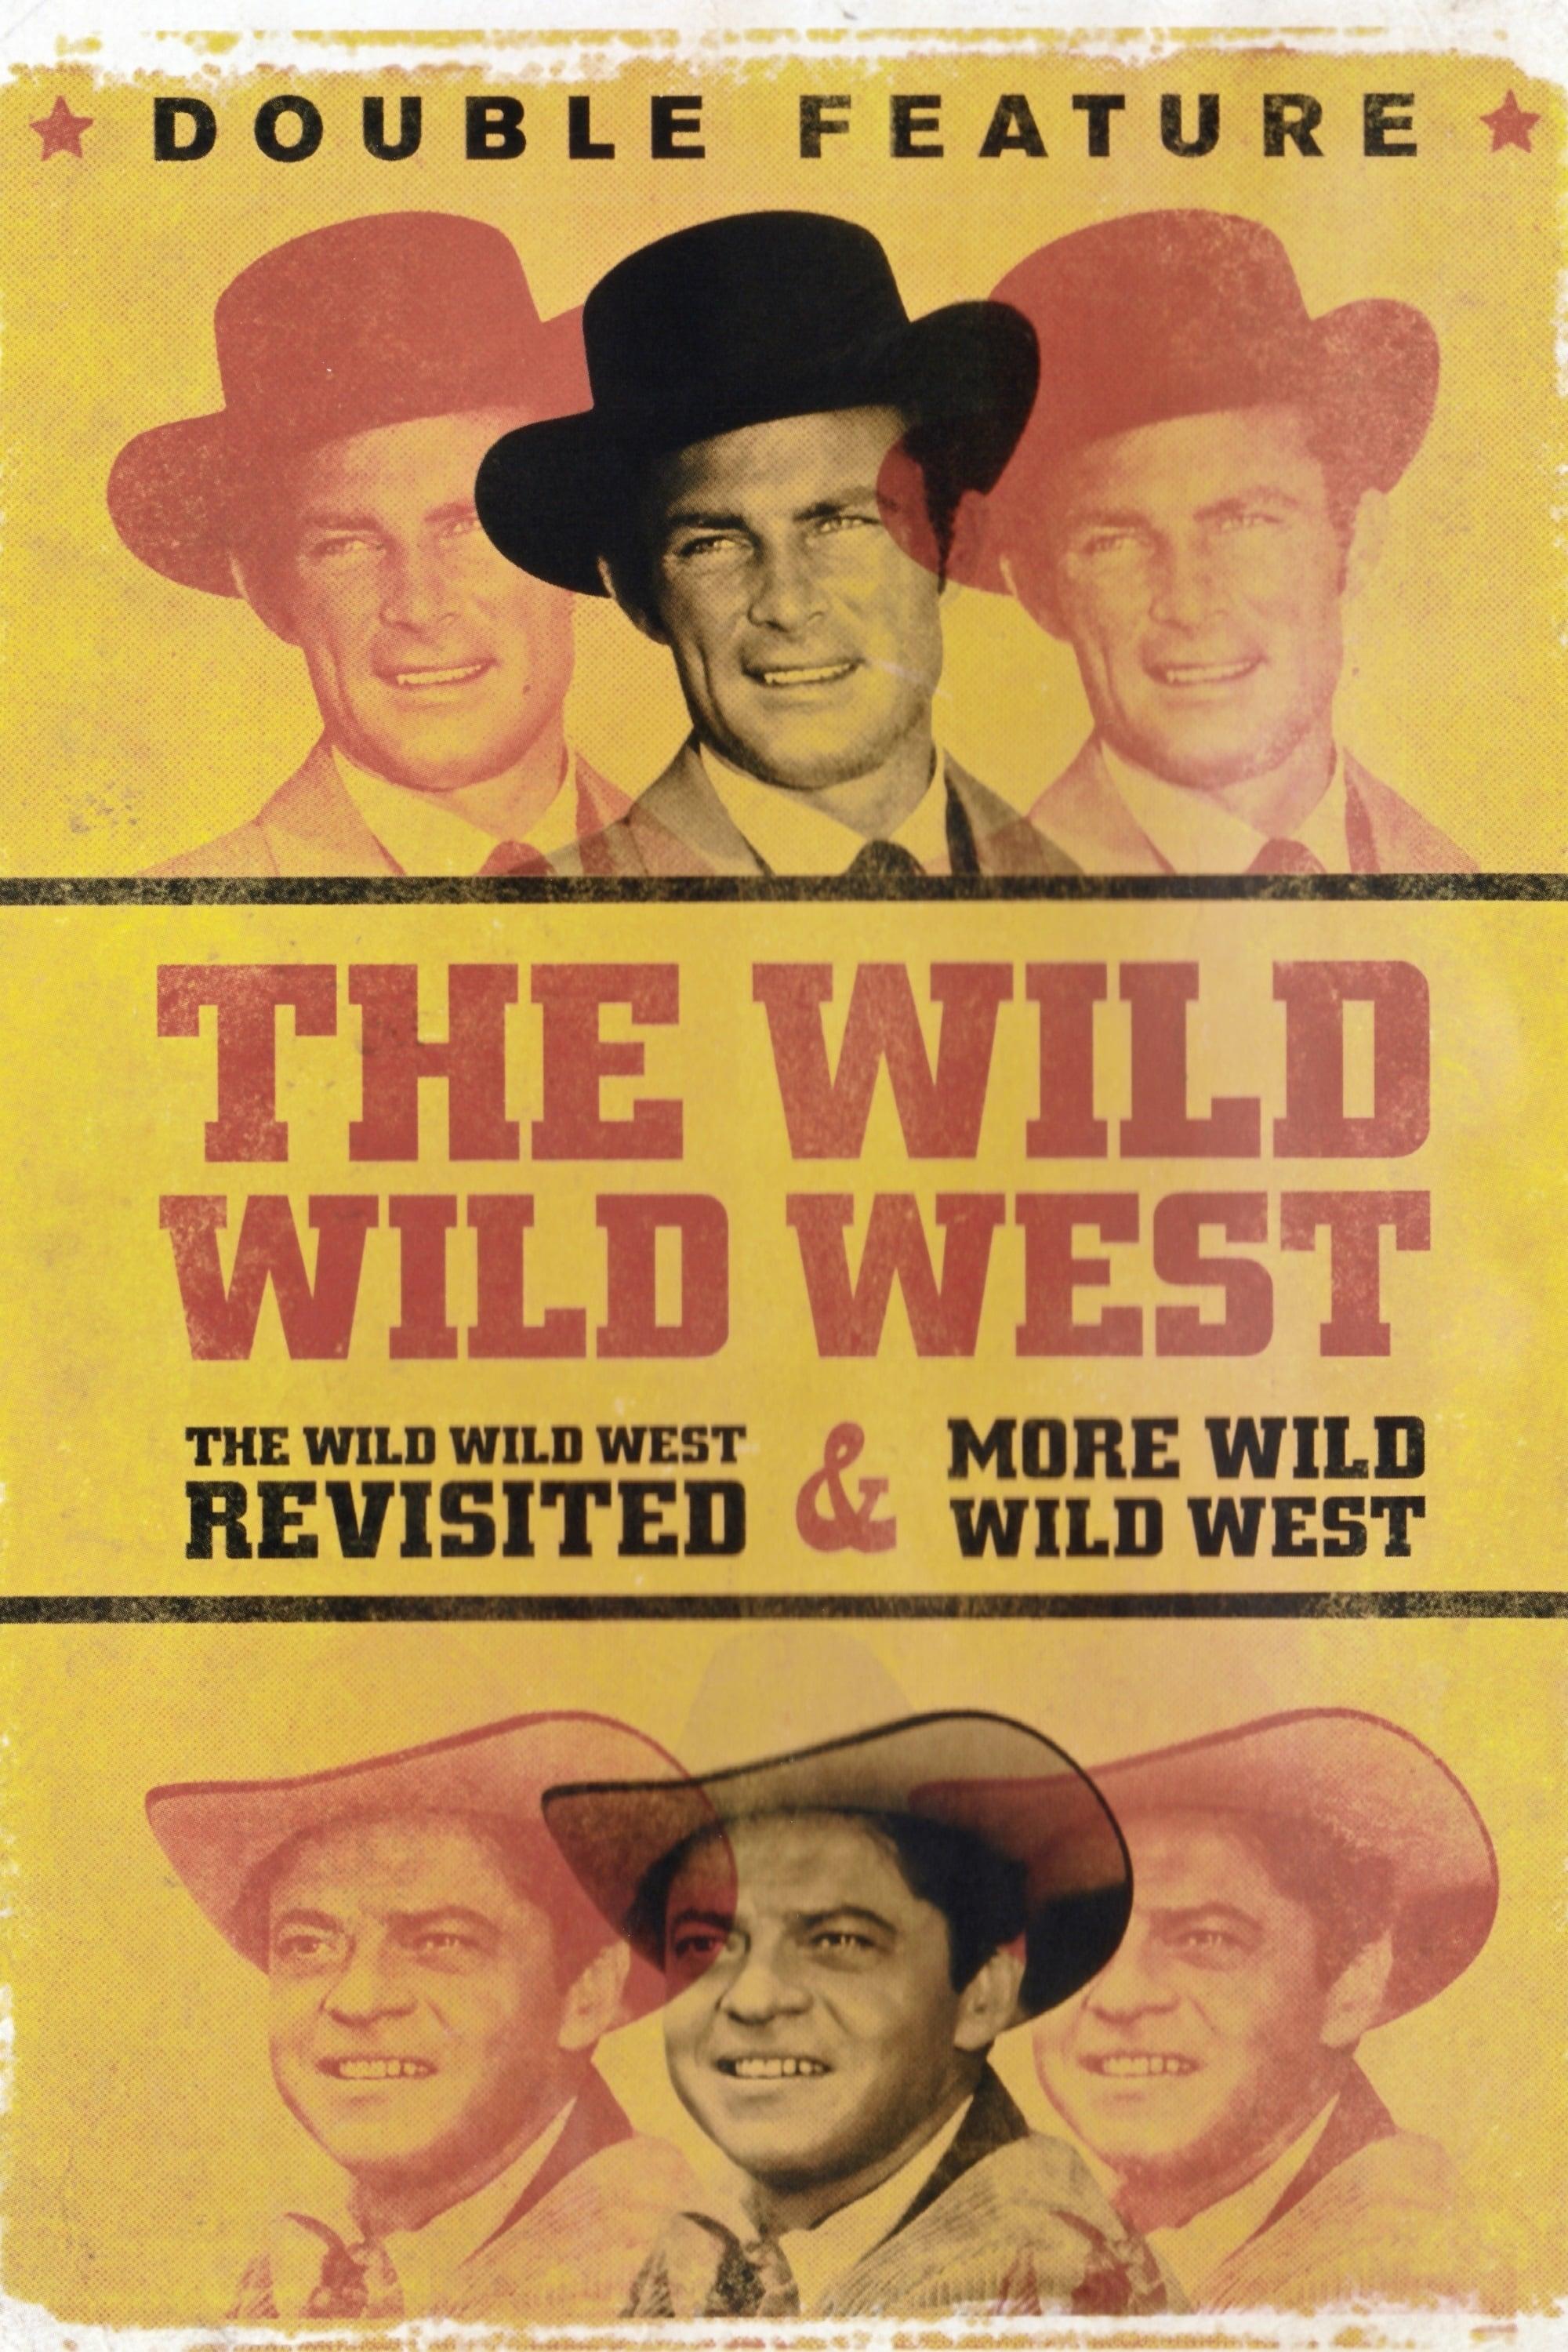 The Wild Wild West Revisited poster